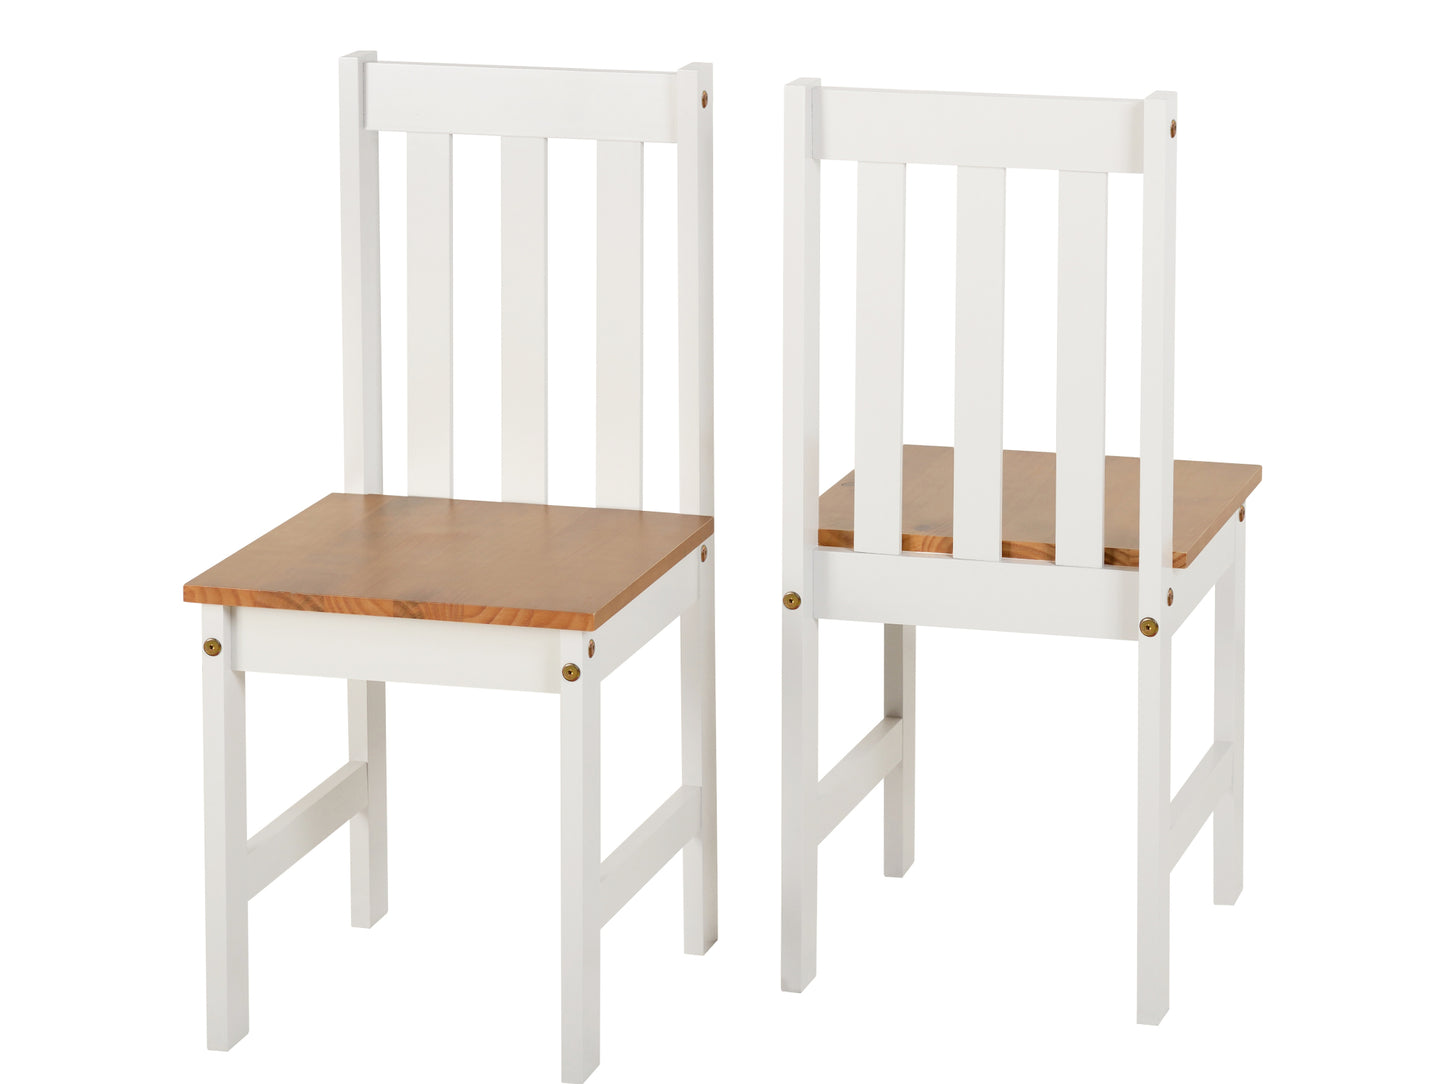 Ludlam 2 Seater Dining Set in White and Oak